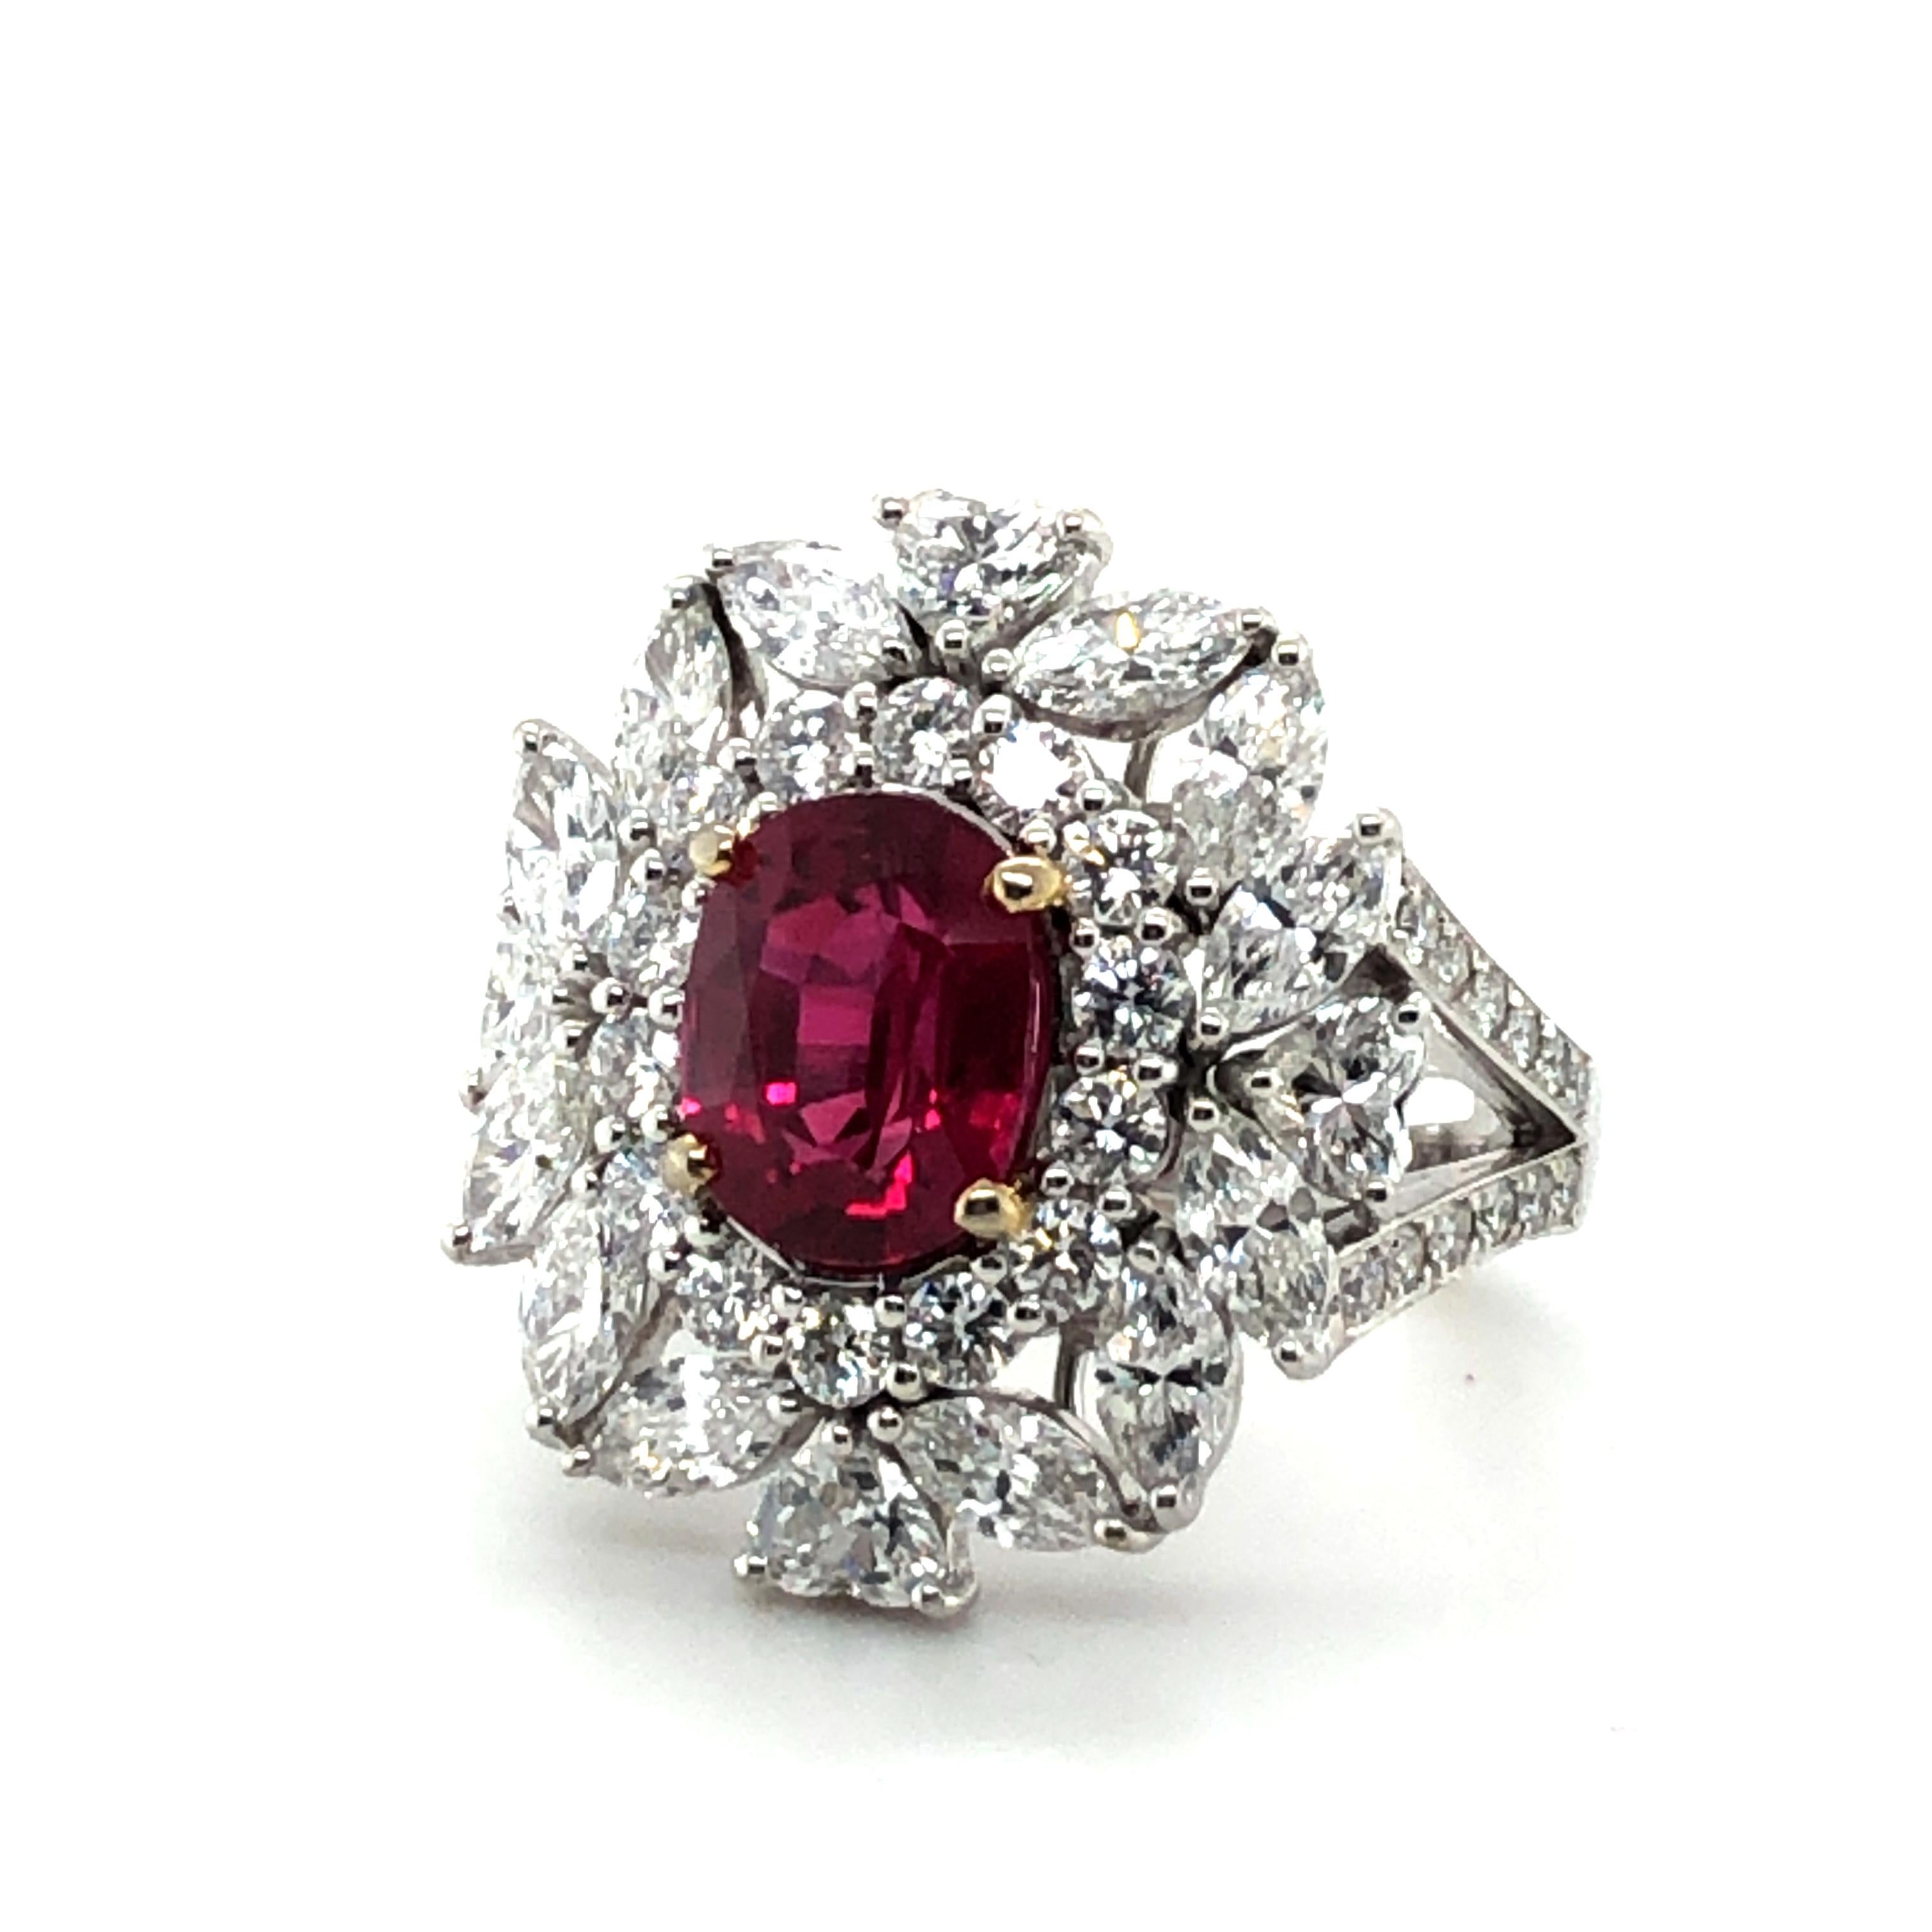 This beautiful ring in 18 karat white gold is set with an oval-shaped ruby of 2.65 carats in a bright red. 
The charming entourage consists of 12 marquise-shaped, 4 heart-shaped, and 38 brilliant-cut diamonds of G/H colour and vs clarity, total